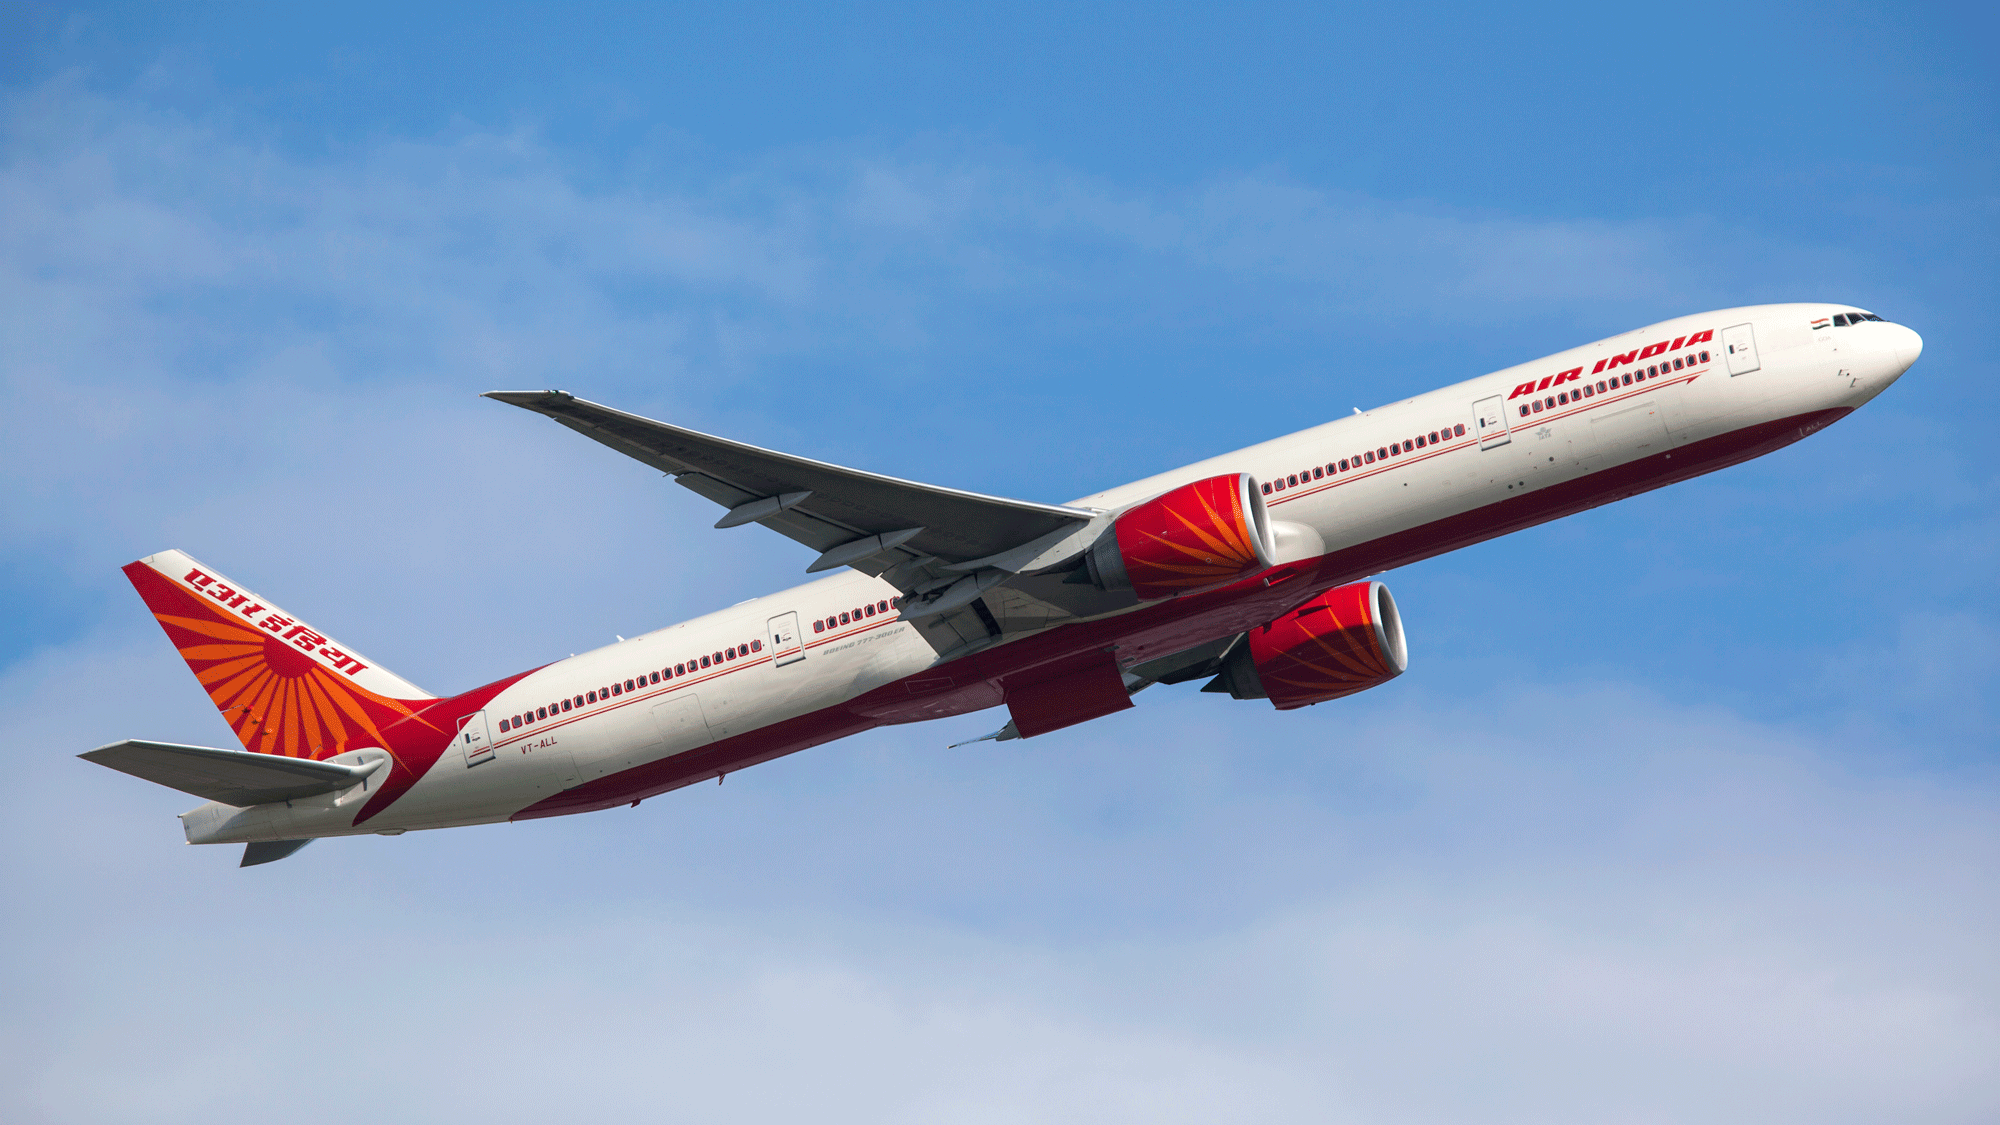 <div class="paragraphs"><p>The <a href="https://www.thequint.com/news/business/air-india-sold-to-tatas-all-about-the-rs-18000-crore-deal-for-national-carrier#read-more">Air India divestment</a> process is expected to reach its completion on 27 January, the airline told its employees in an email on Monday, 24 January.</p></div>